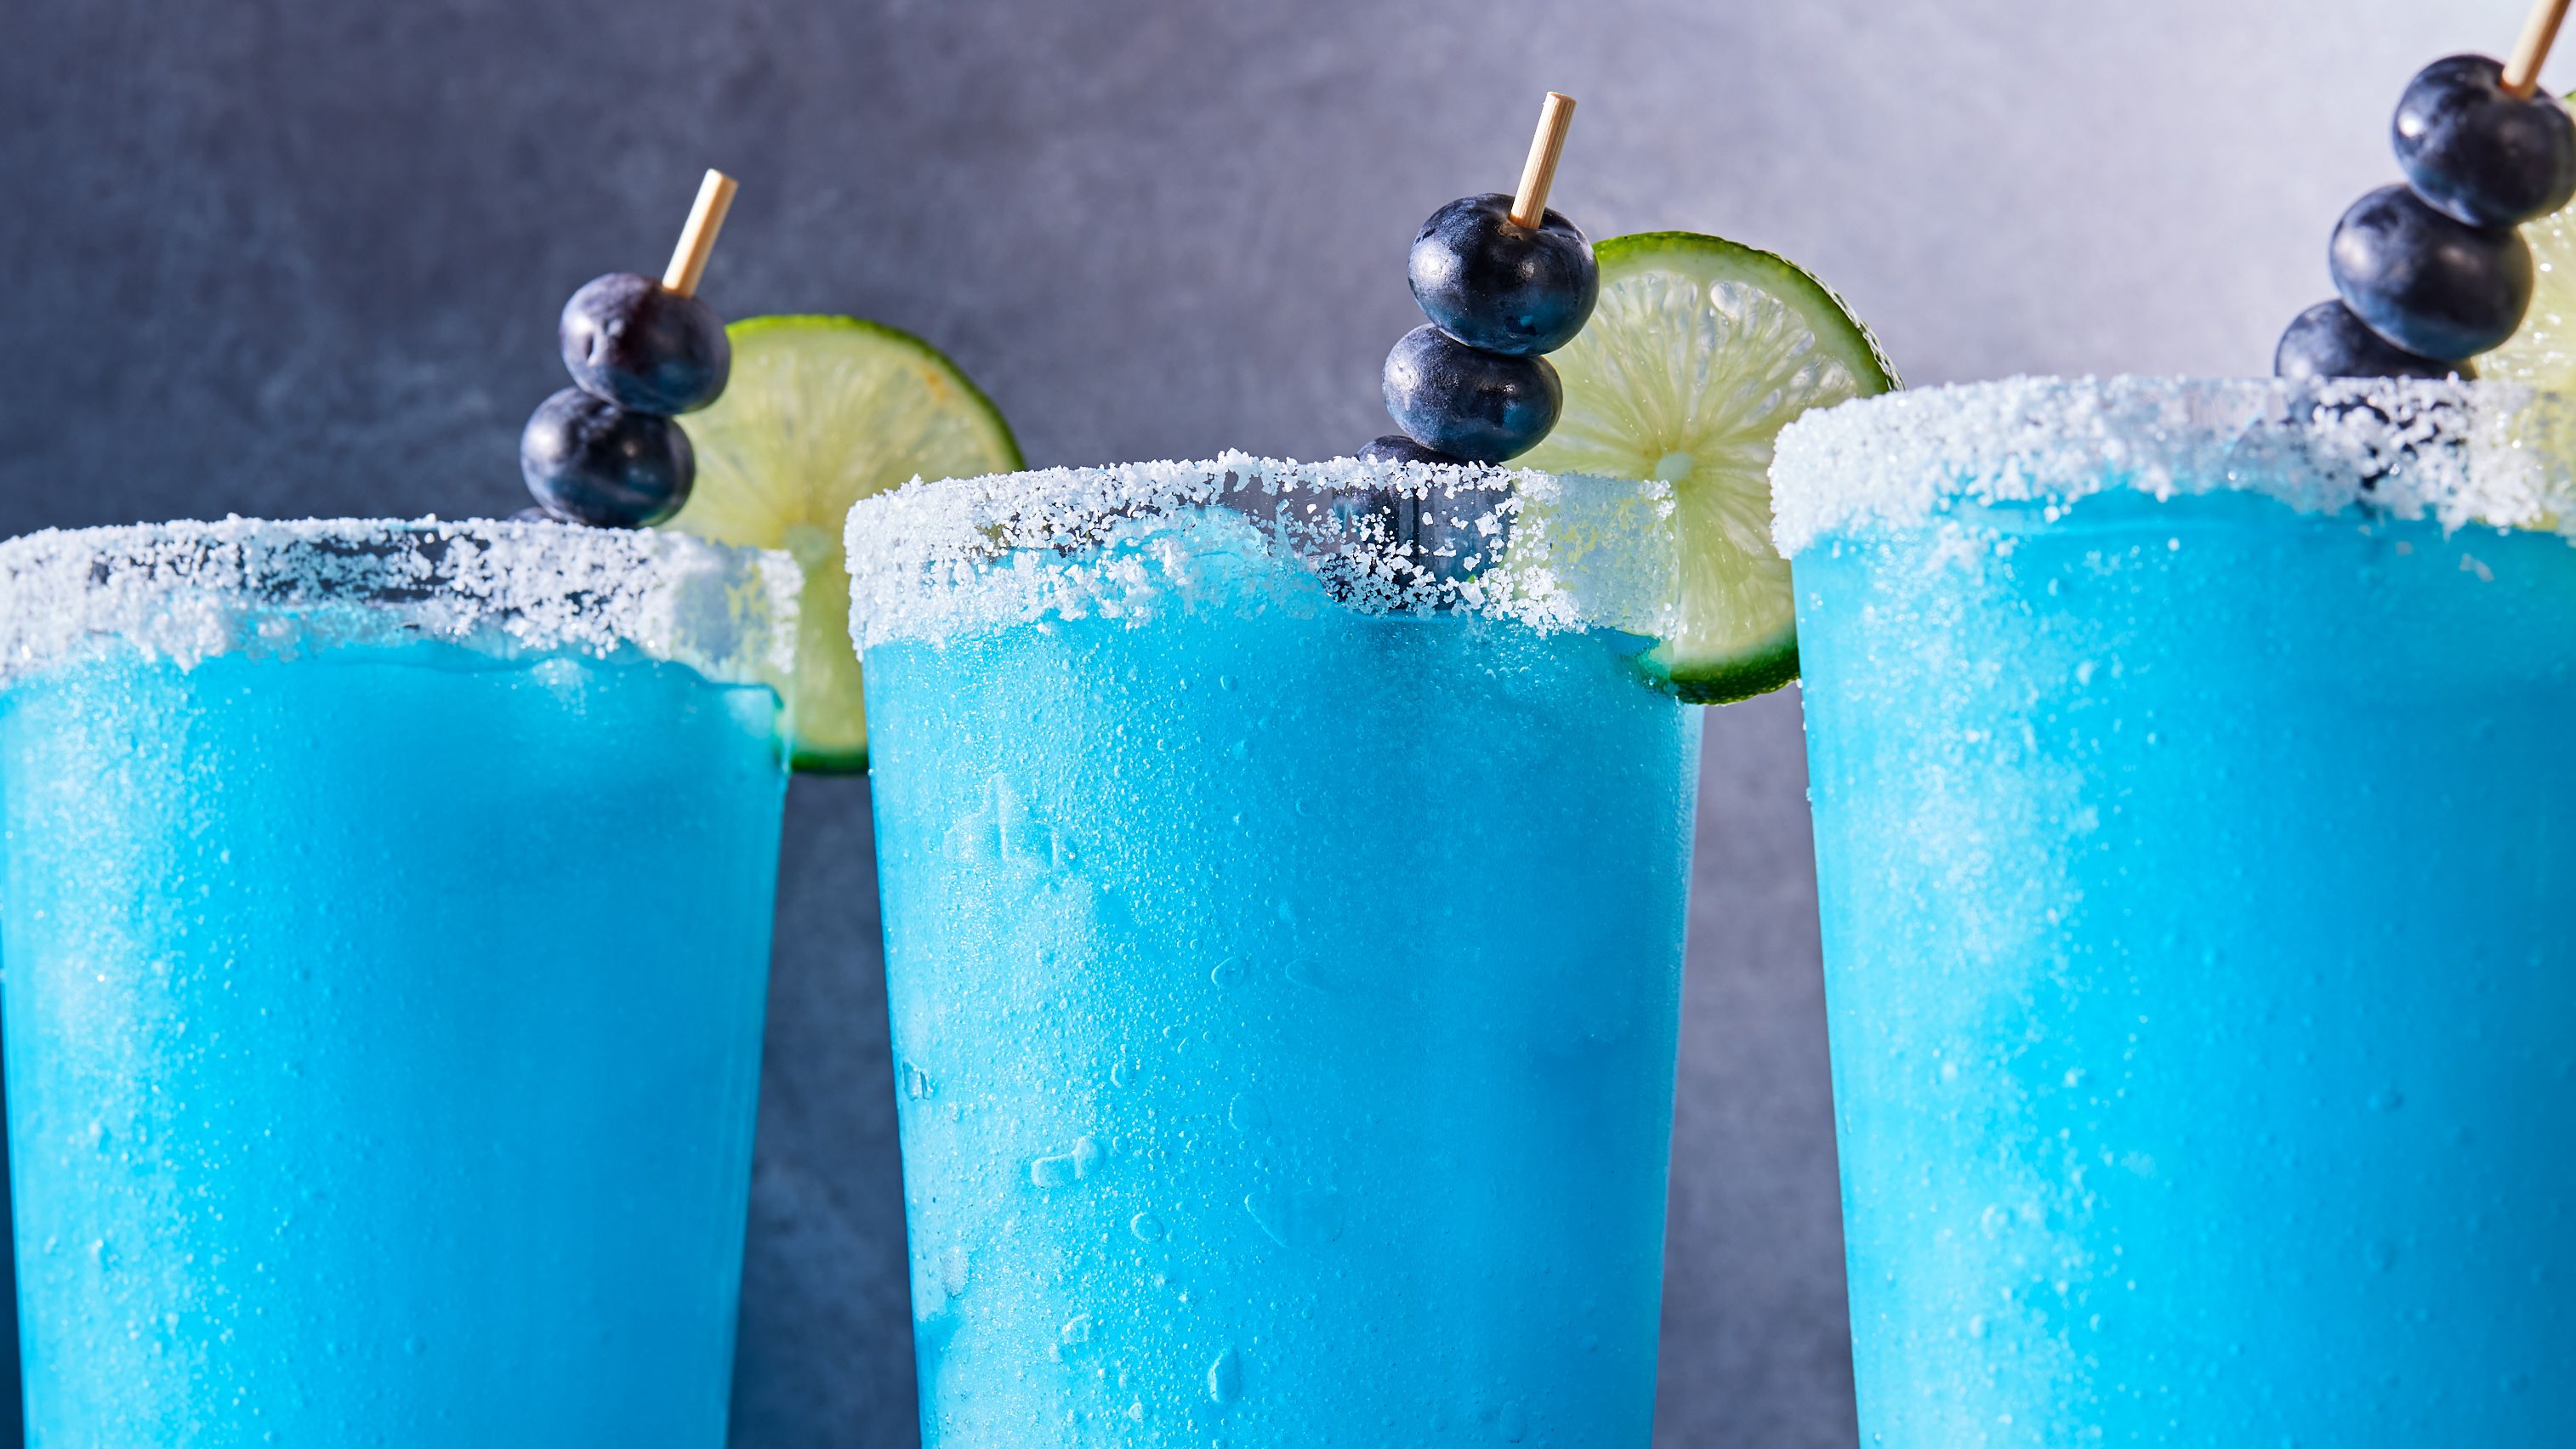 Best Blue Margaritas Recipe - How To Make Frozen Blue Moscato